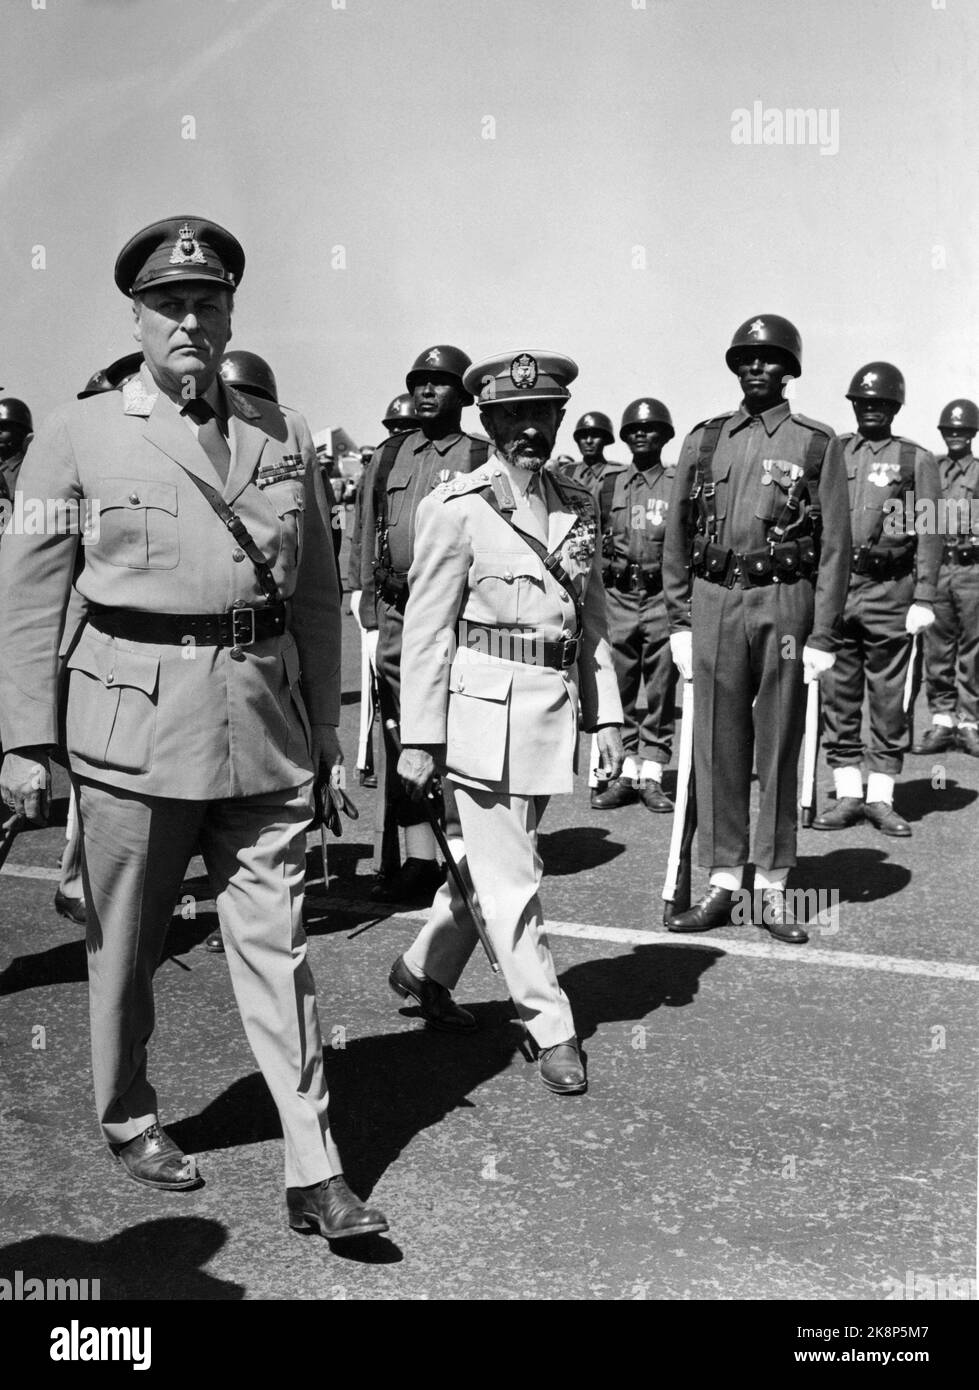 Ethiopia 1966. King Olav visits Ethiopia in January 1966. Here King Olav (TV) inspects troops with Emperor Haile Selassie. Photo: Henrik Laurvik / NTB. Stock Photo